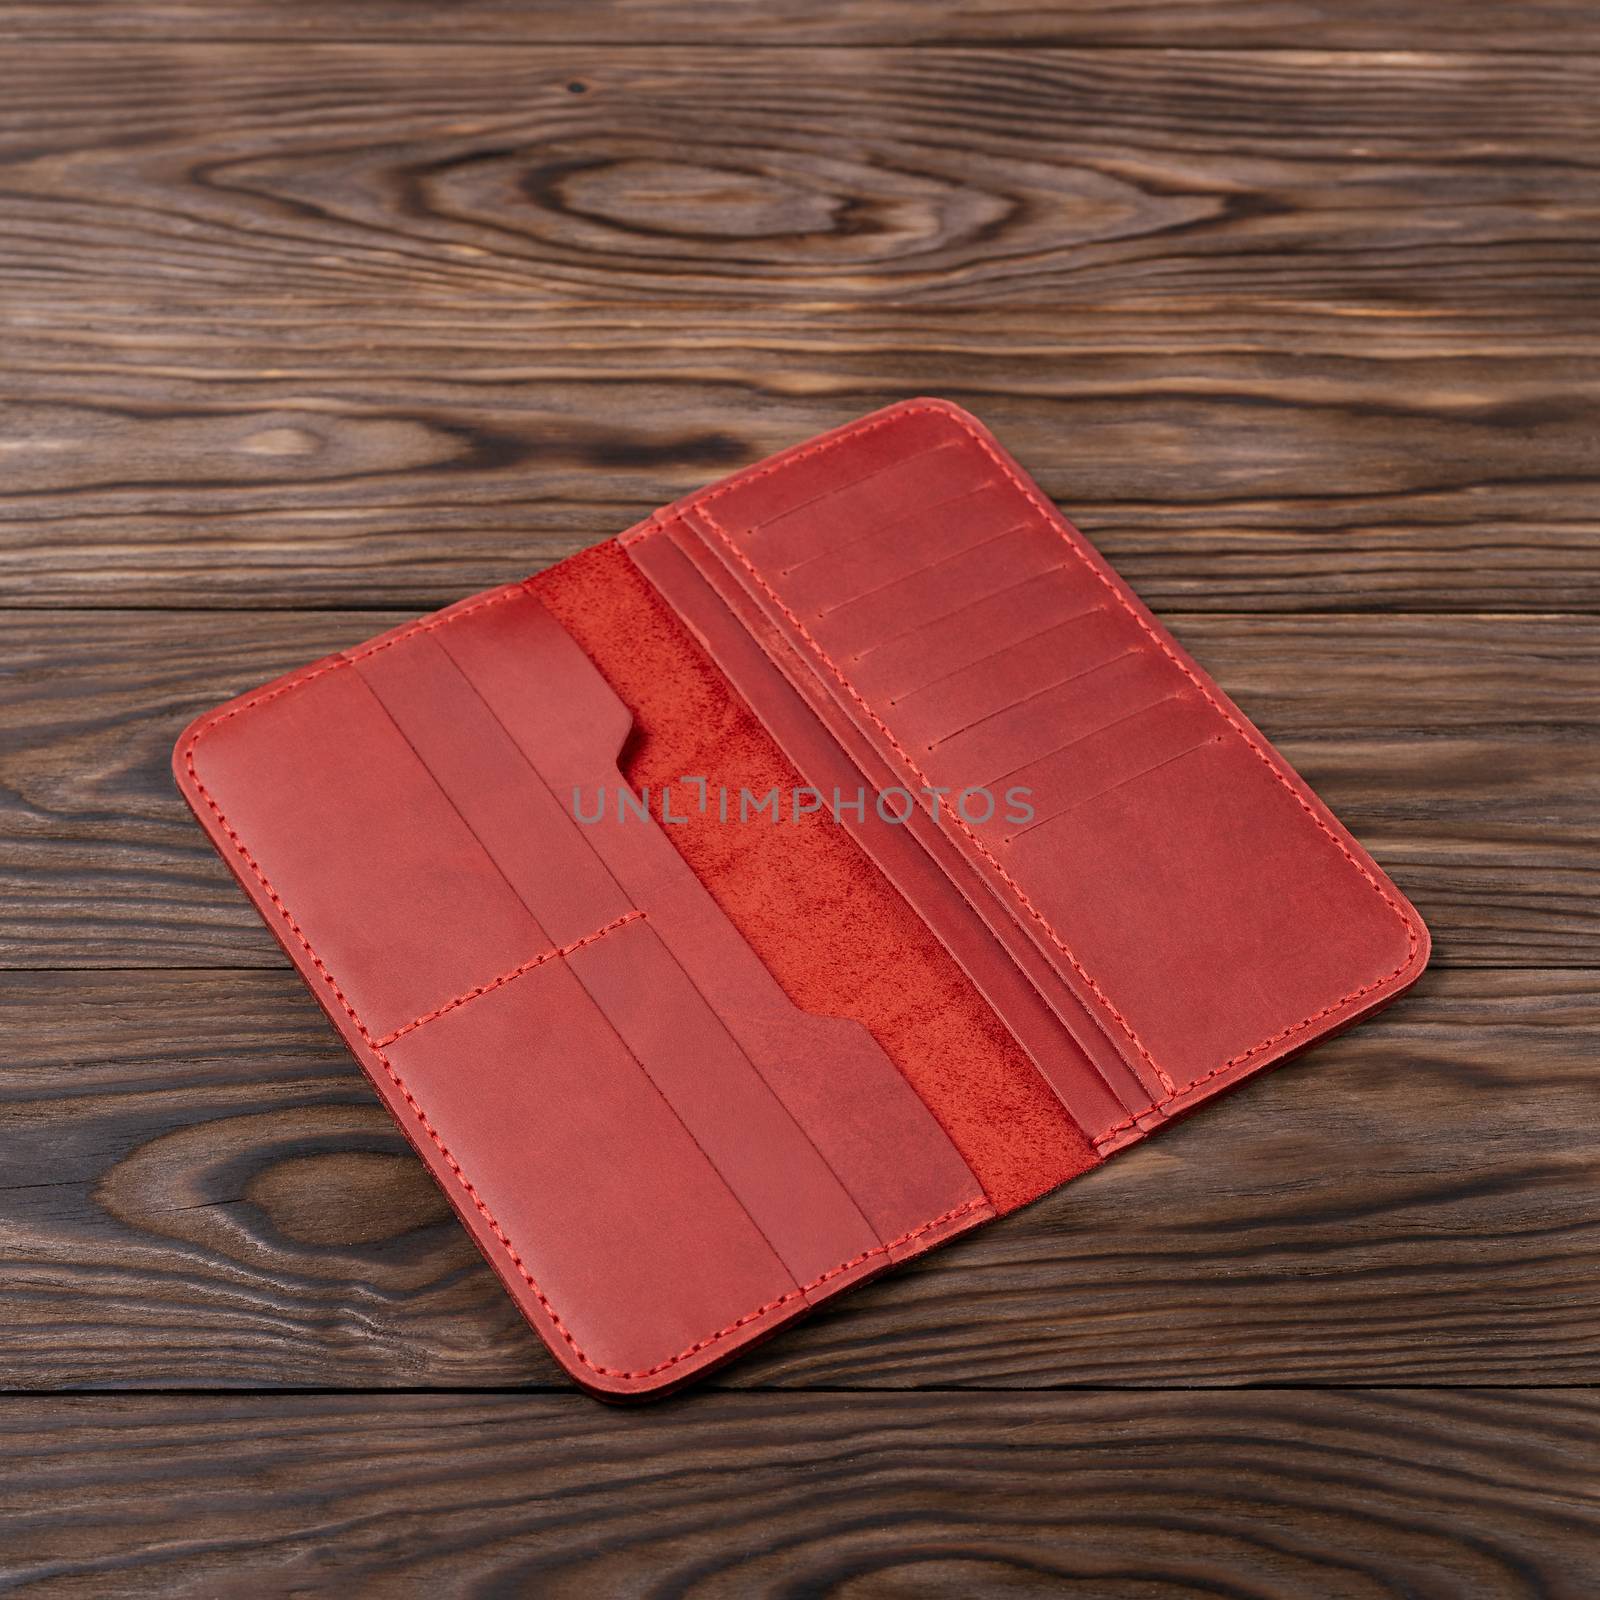 Hue red color handmade leather porte-monnaie on wooden textured background. Purse is opened and empty. Side view. Stock photo of luxury accessories.